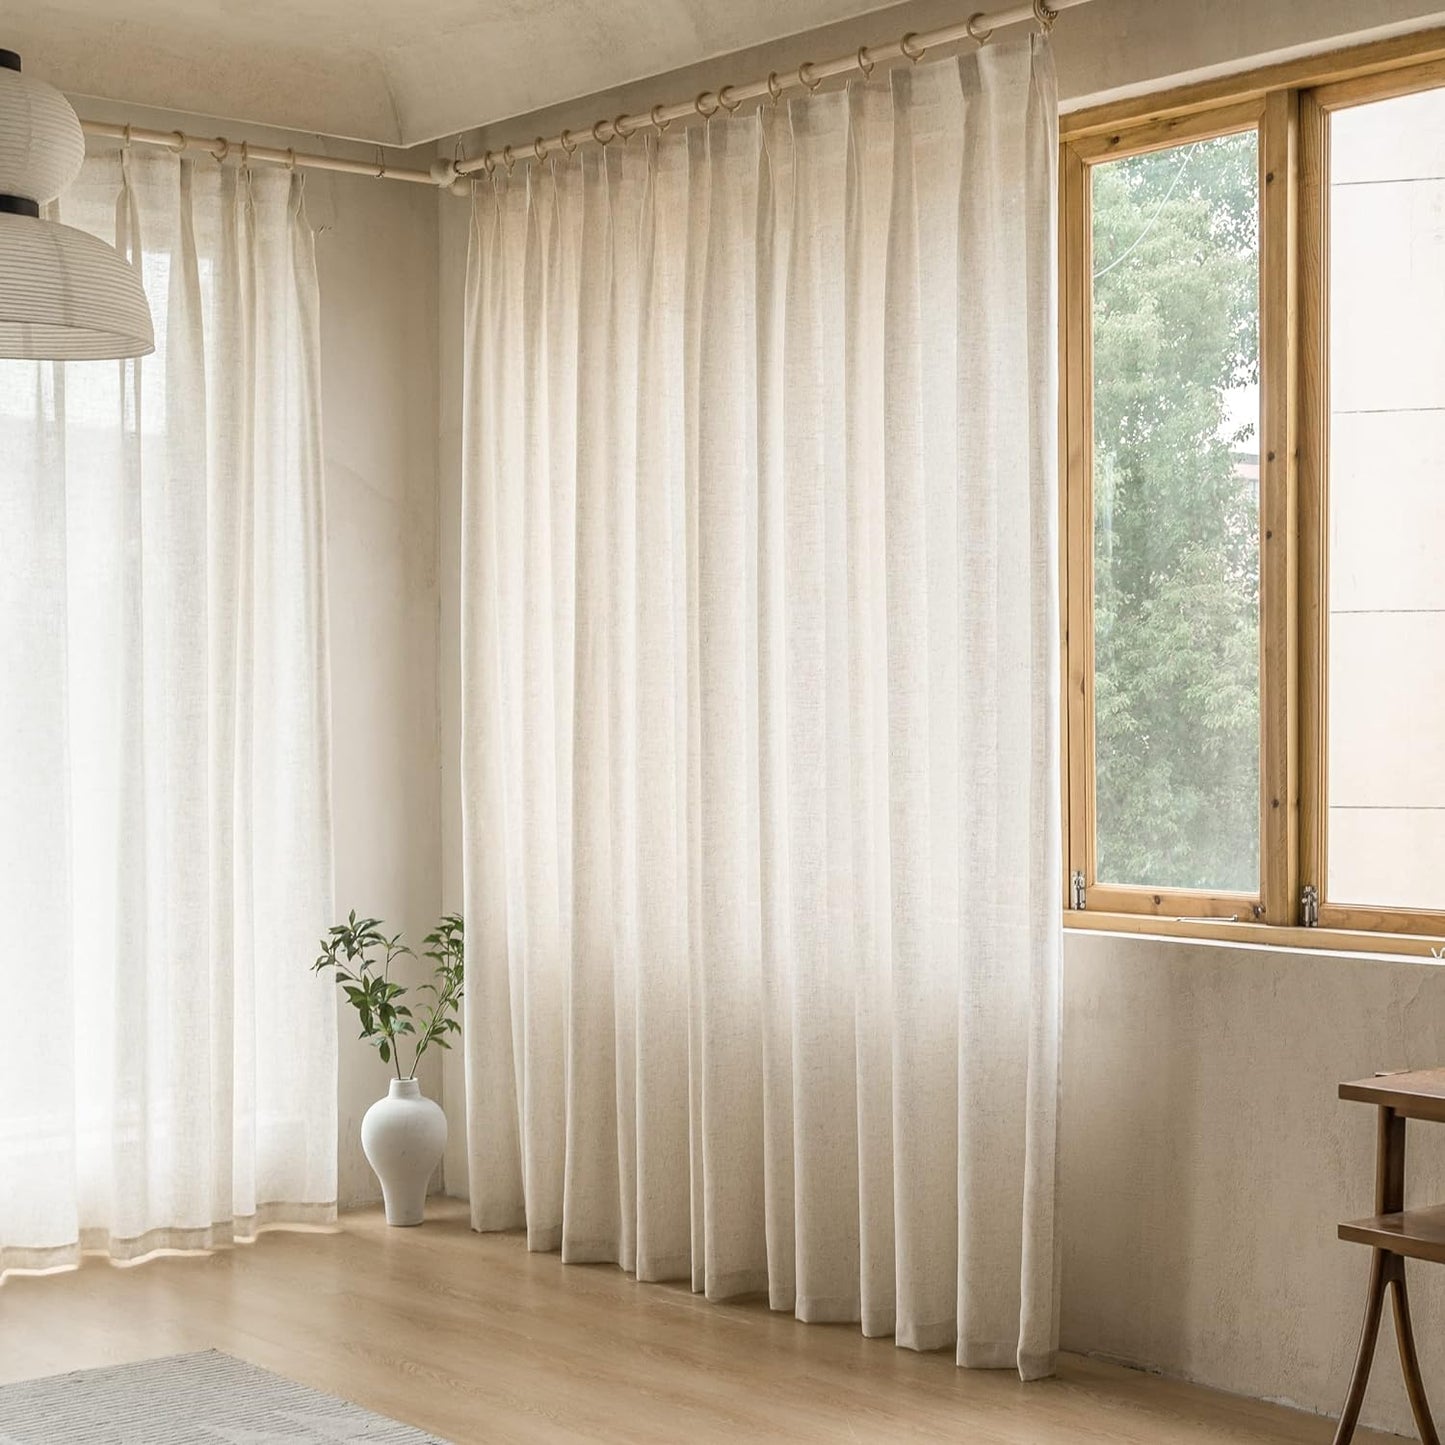 MAIHER Extra Wide Faux Linen Curtains Pinch Pleated, 108 Inches Long Light Filtering Semi Sheer Curtains Patio Door for Living Room, Pinch Pleat Drapes with Hooks (1 Panel, 84" W X 108" L)  MAIHER Linen 54X72 